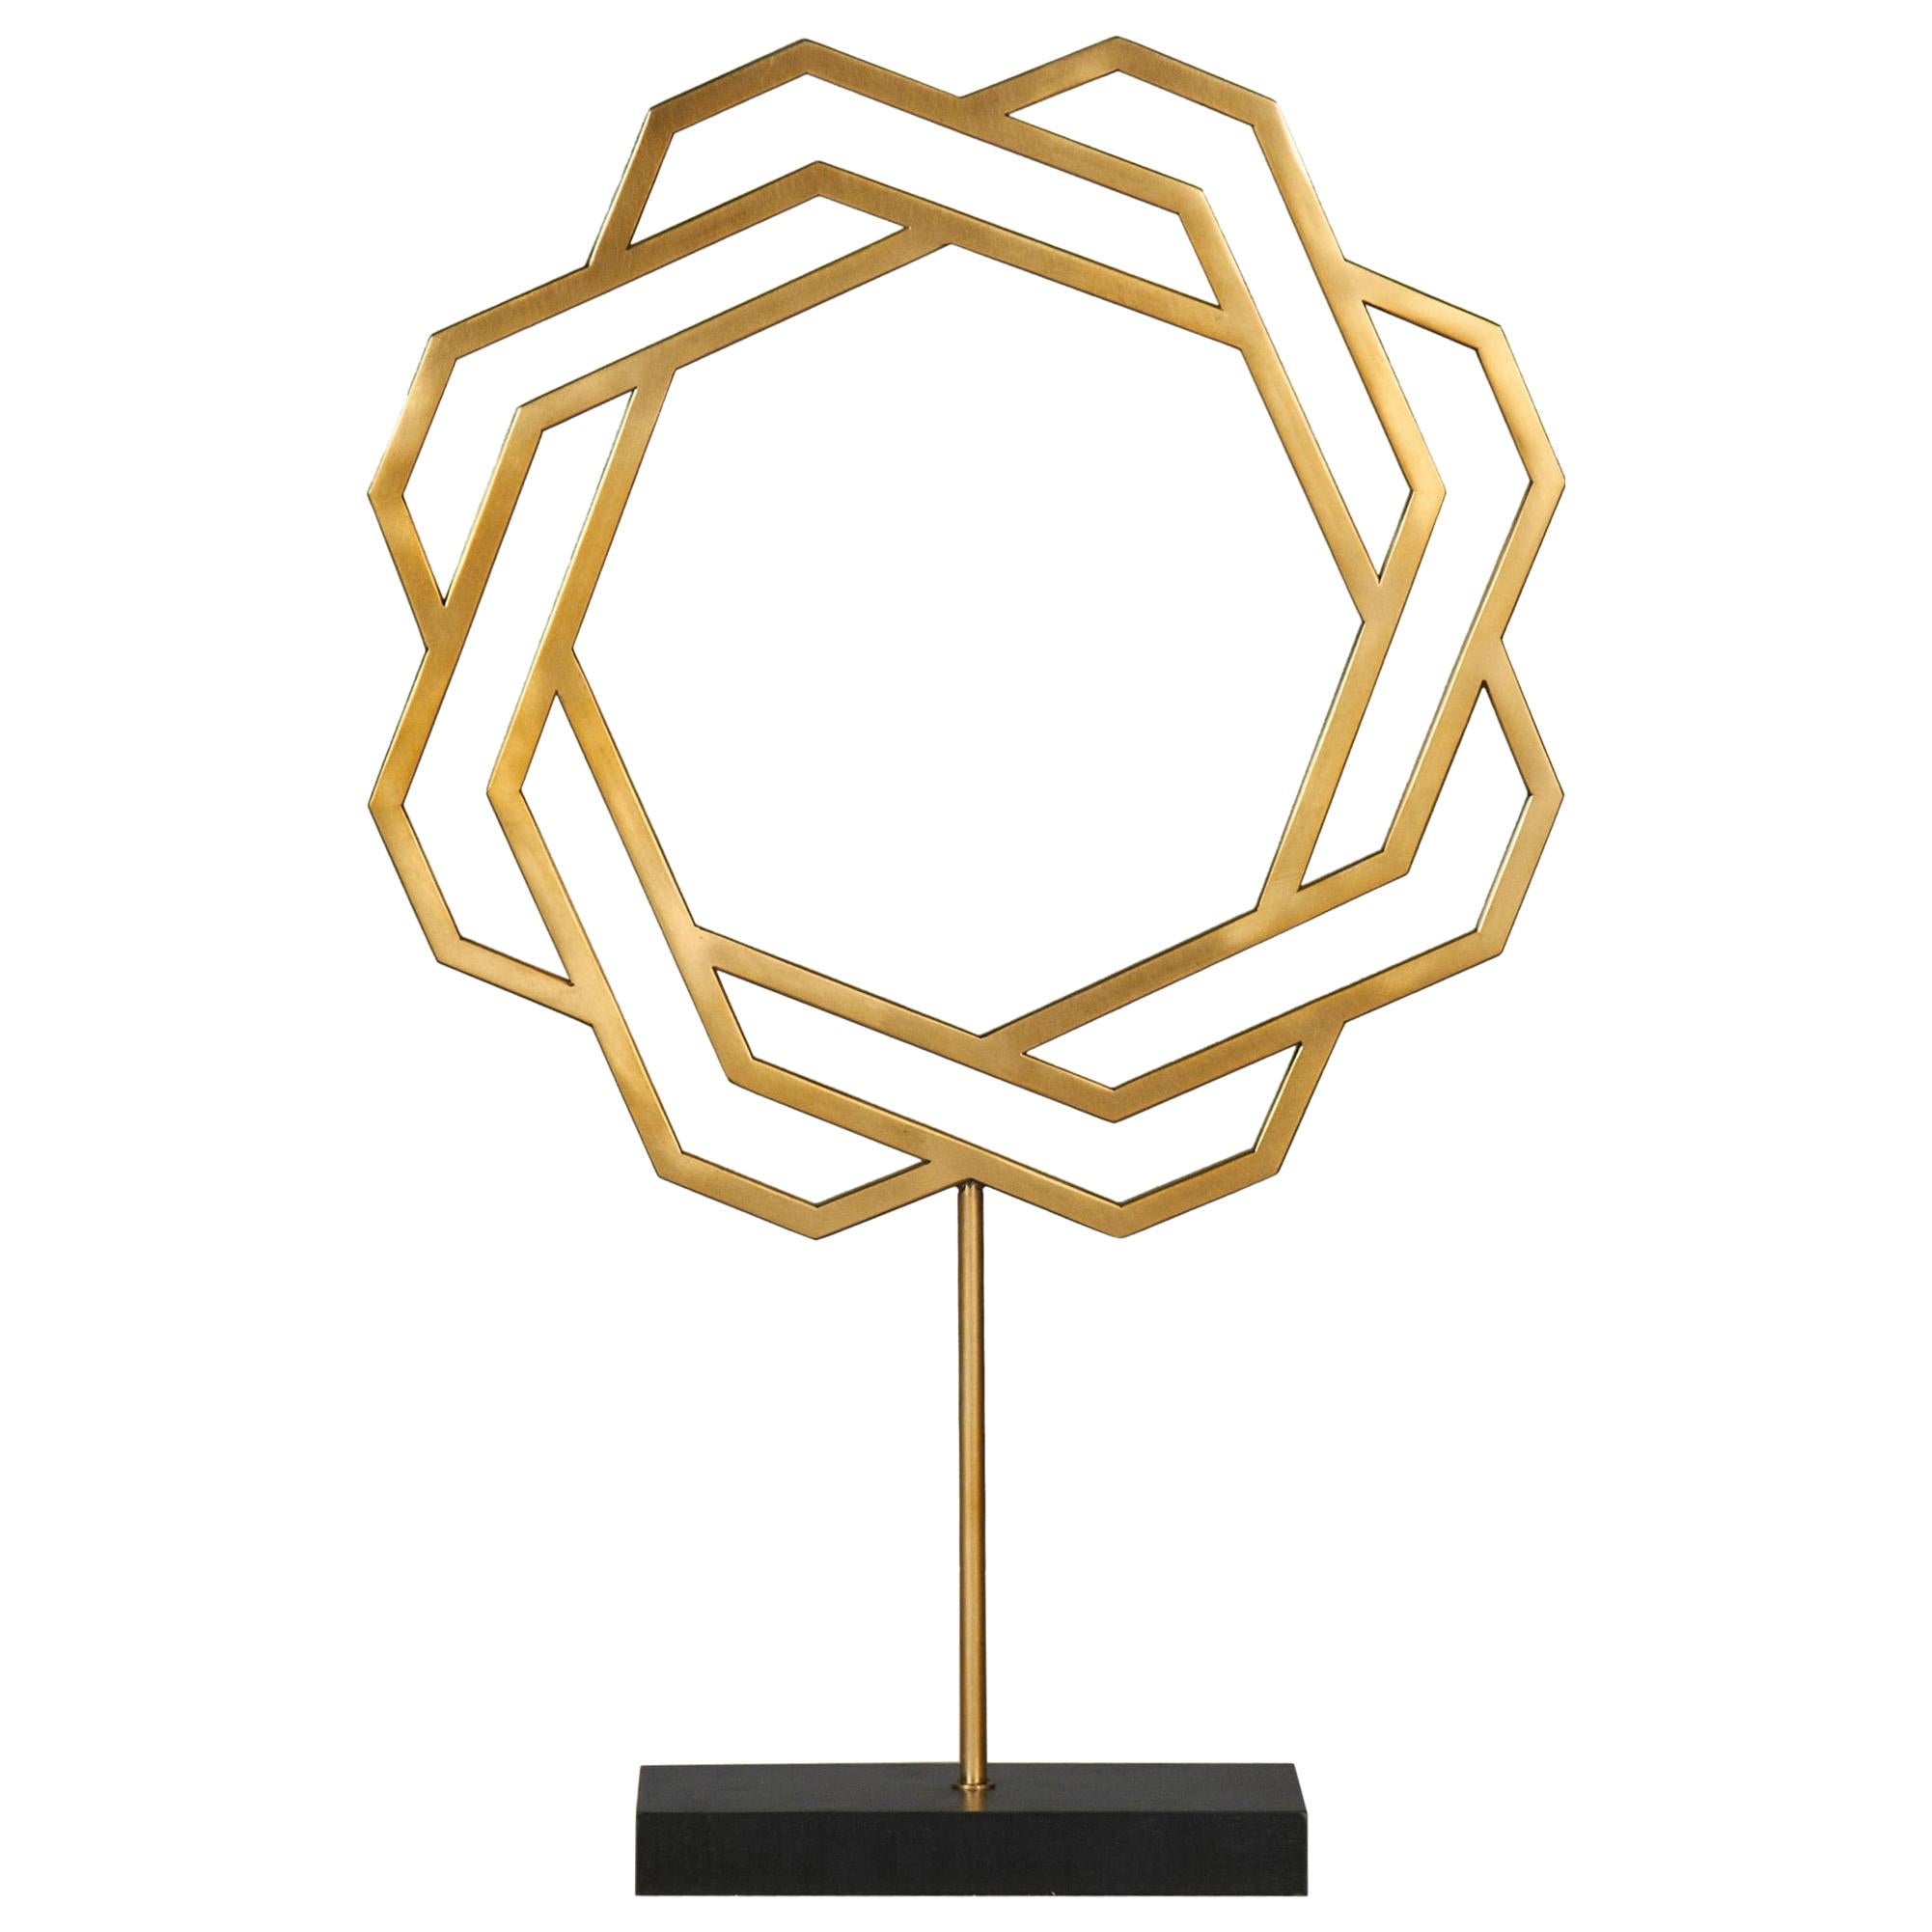 Kaiser Decorative Sculpture in Gold Stainless Steel by CuratedKravet